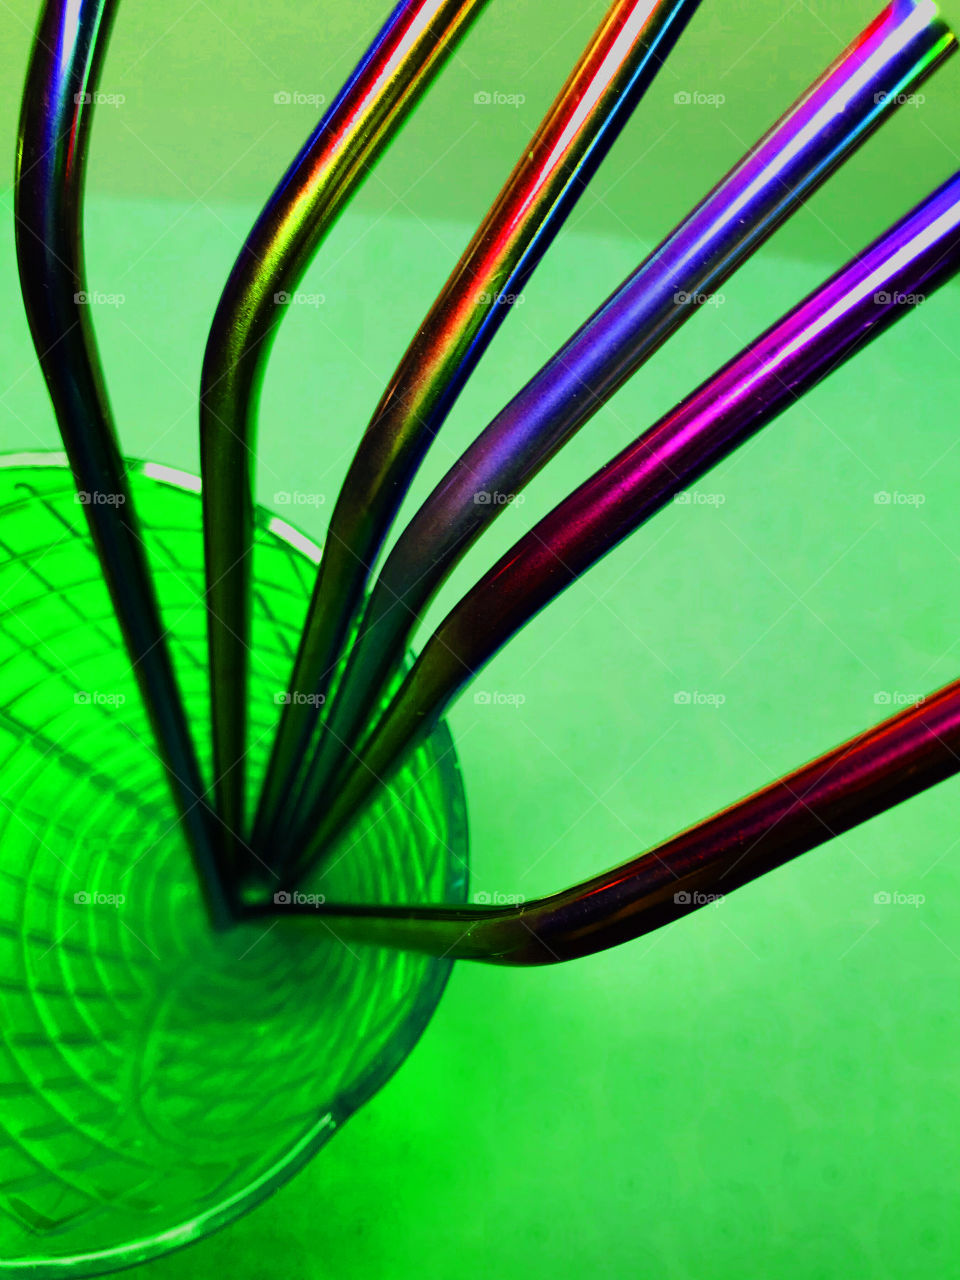 Rainbow metal straws splayed out in a green fluted & textured glass on a green background. 